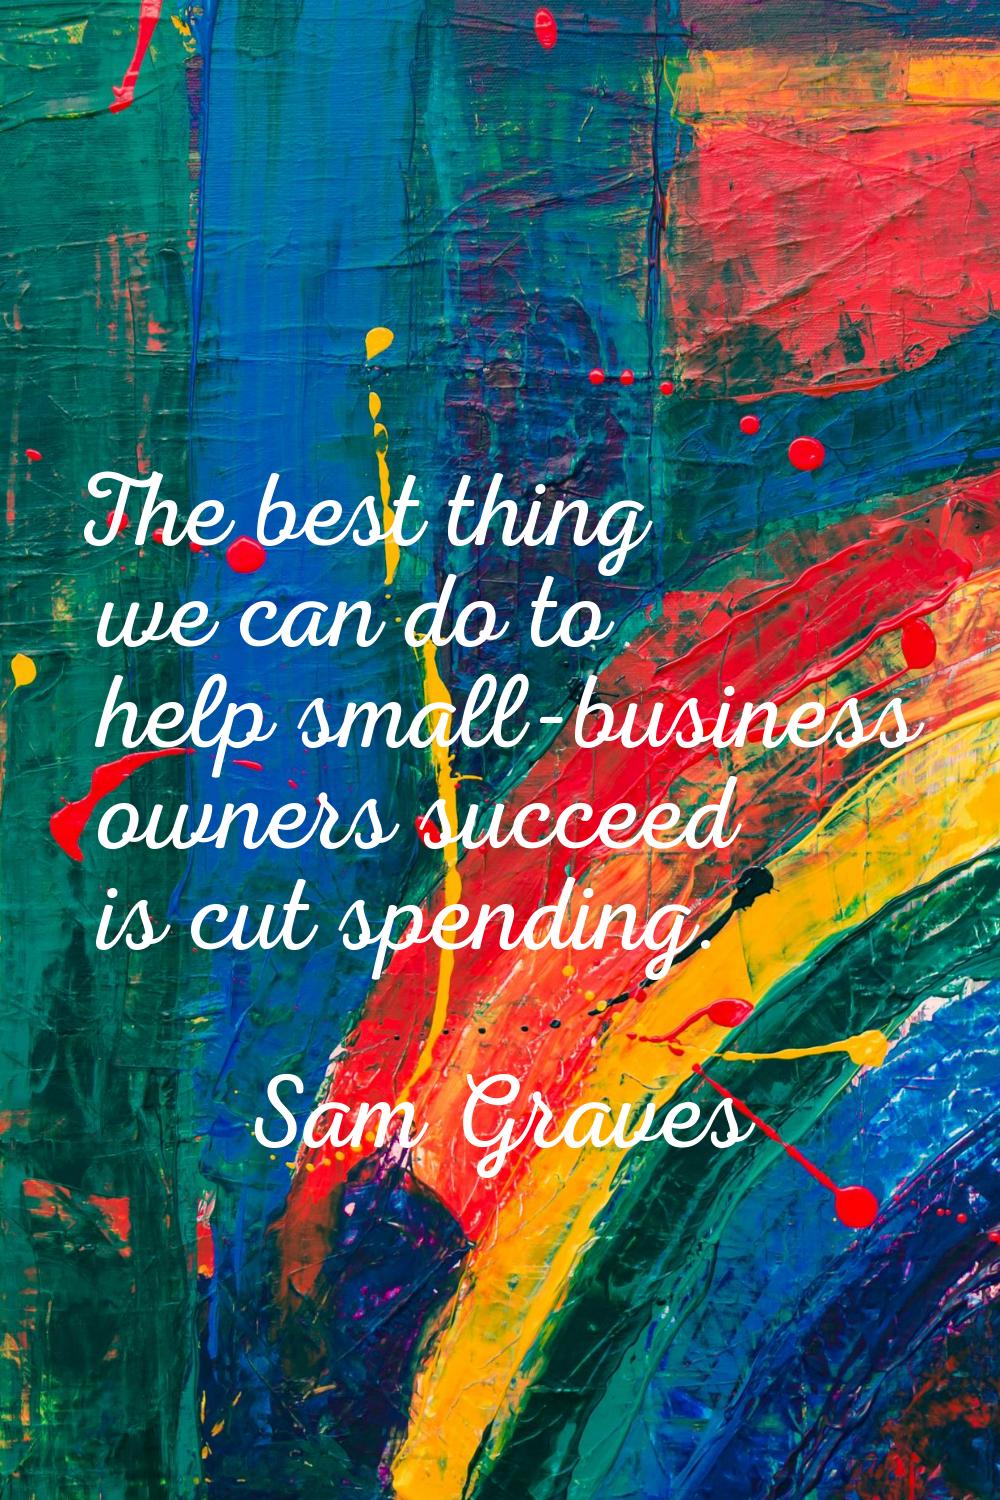 The best thing we can do to help small-business owners succeed is cut spending.